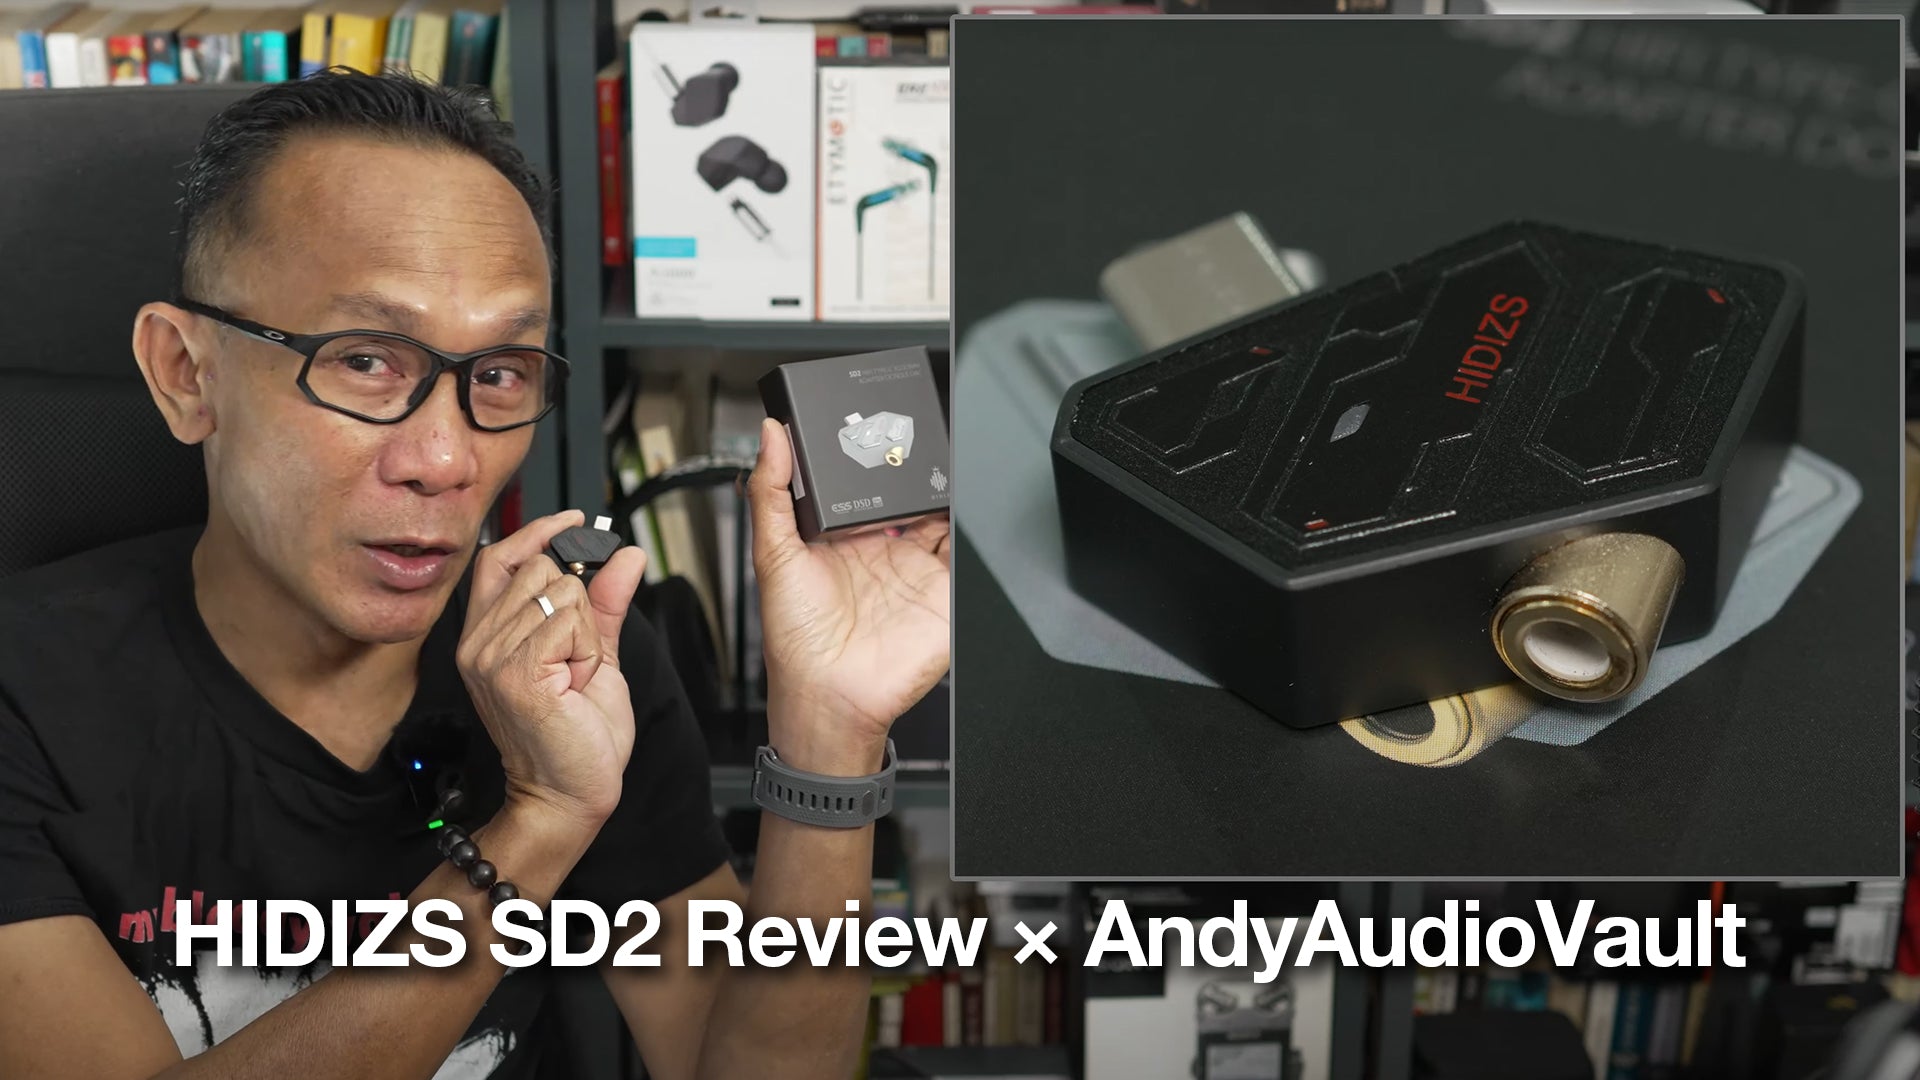 HIDIZS SD2 Review - AndyAudioVault